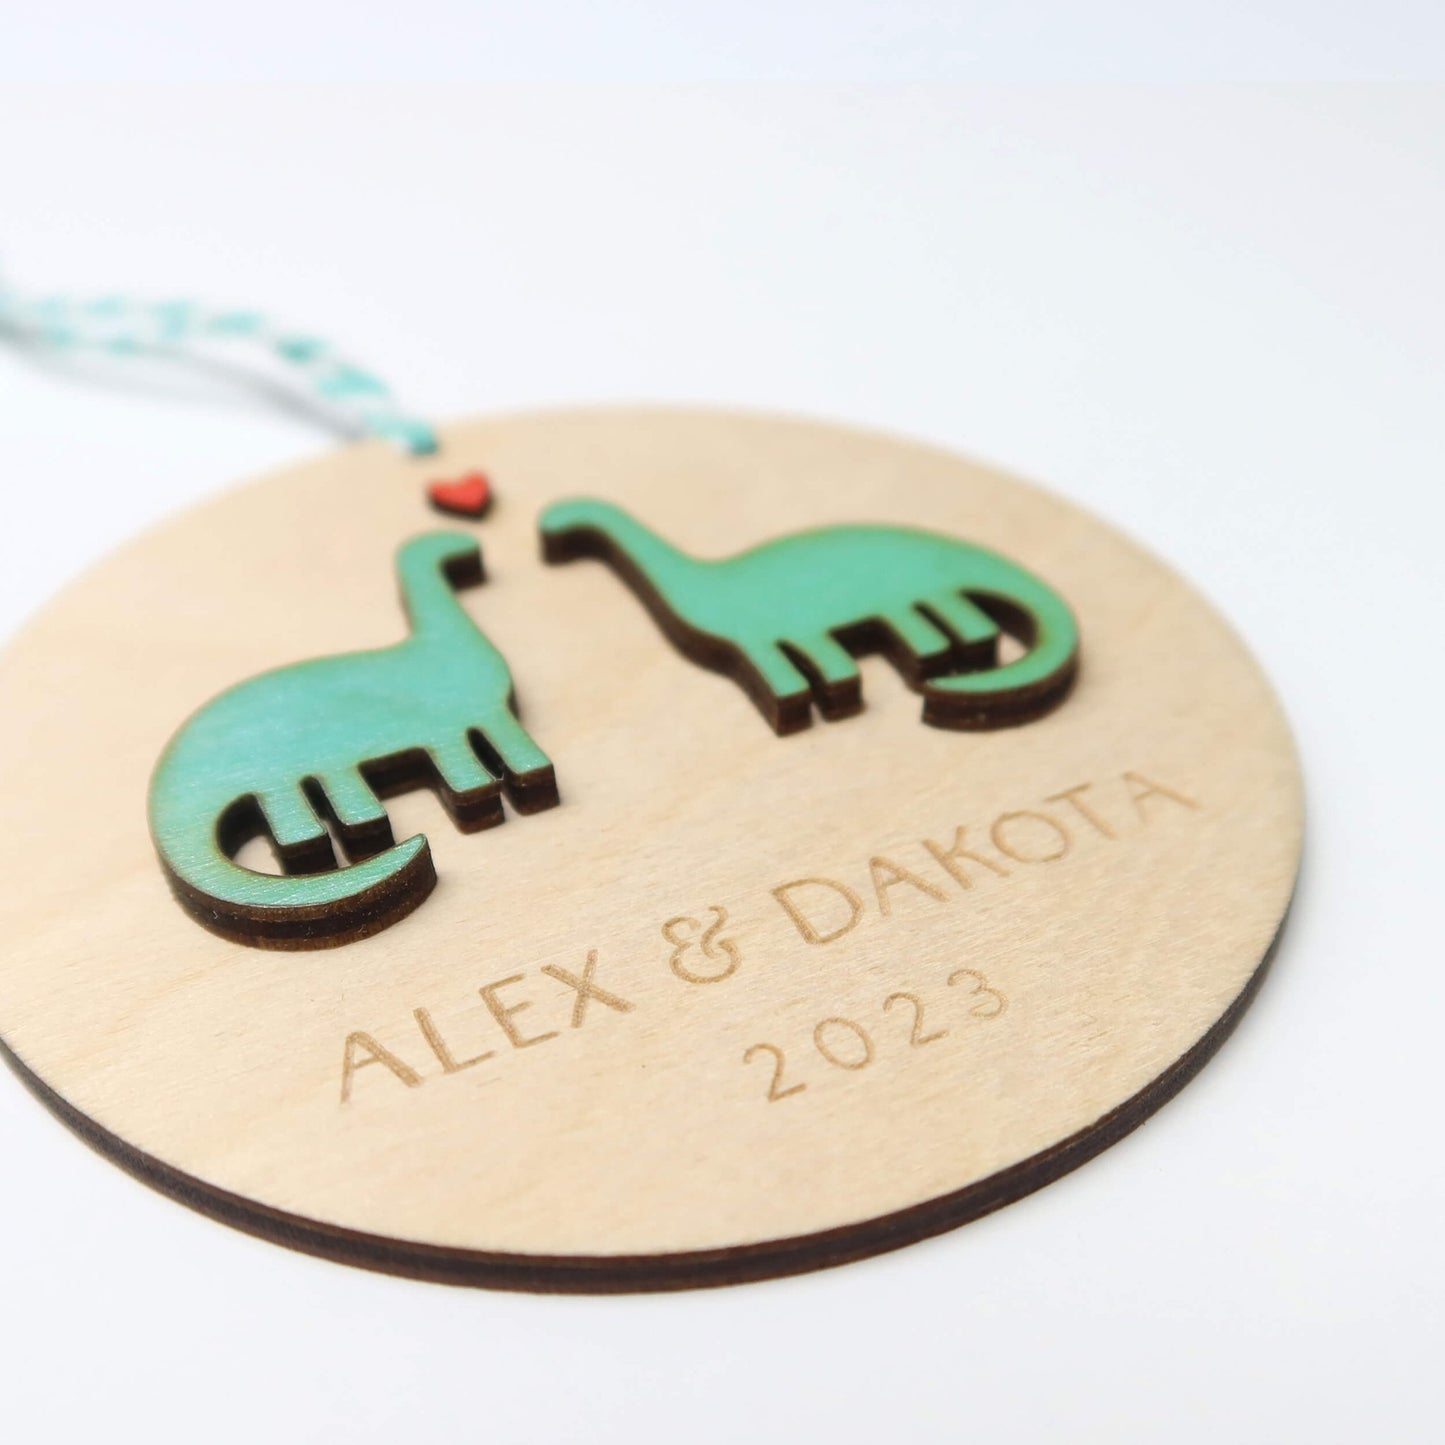 Dinosaurs Personalized Couple Christmas Ornament - Holiday Ornaments - Moon Rock Prints